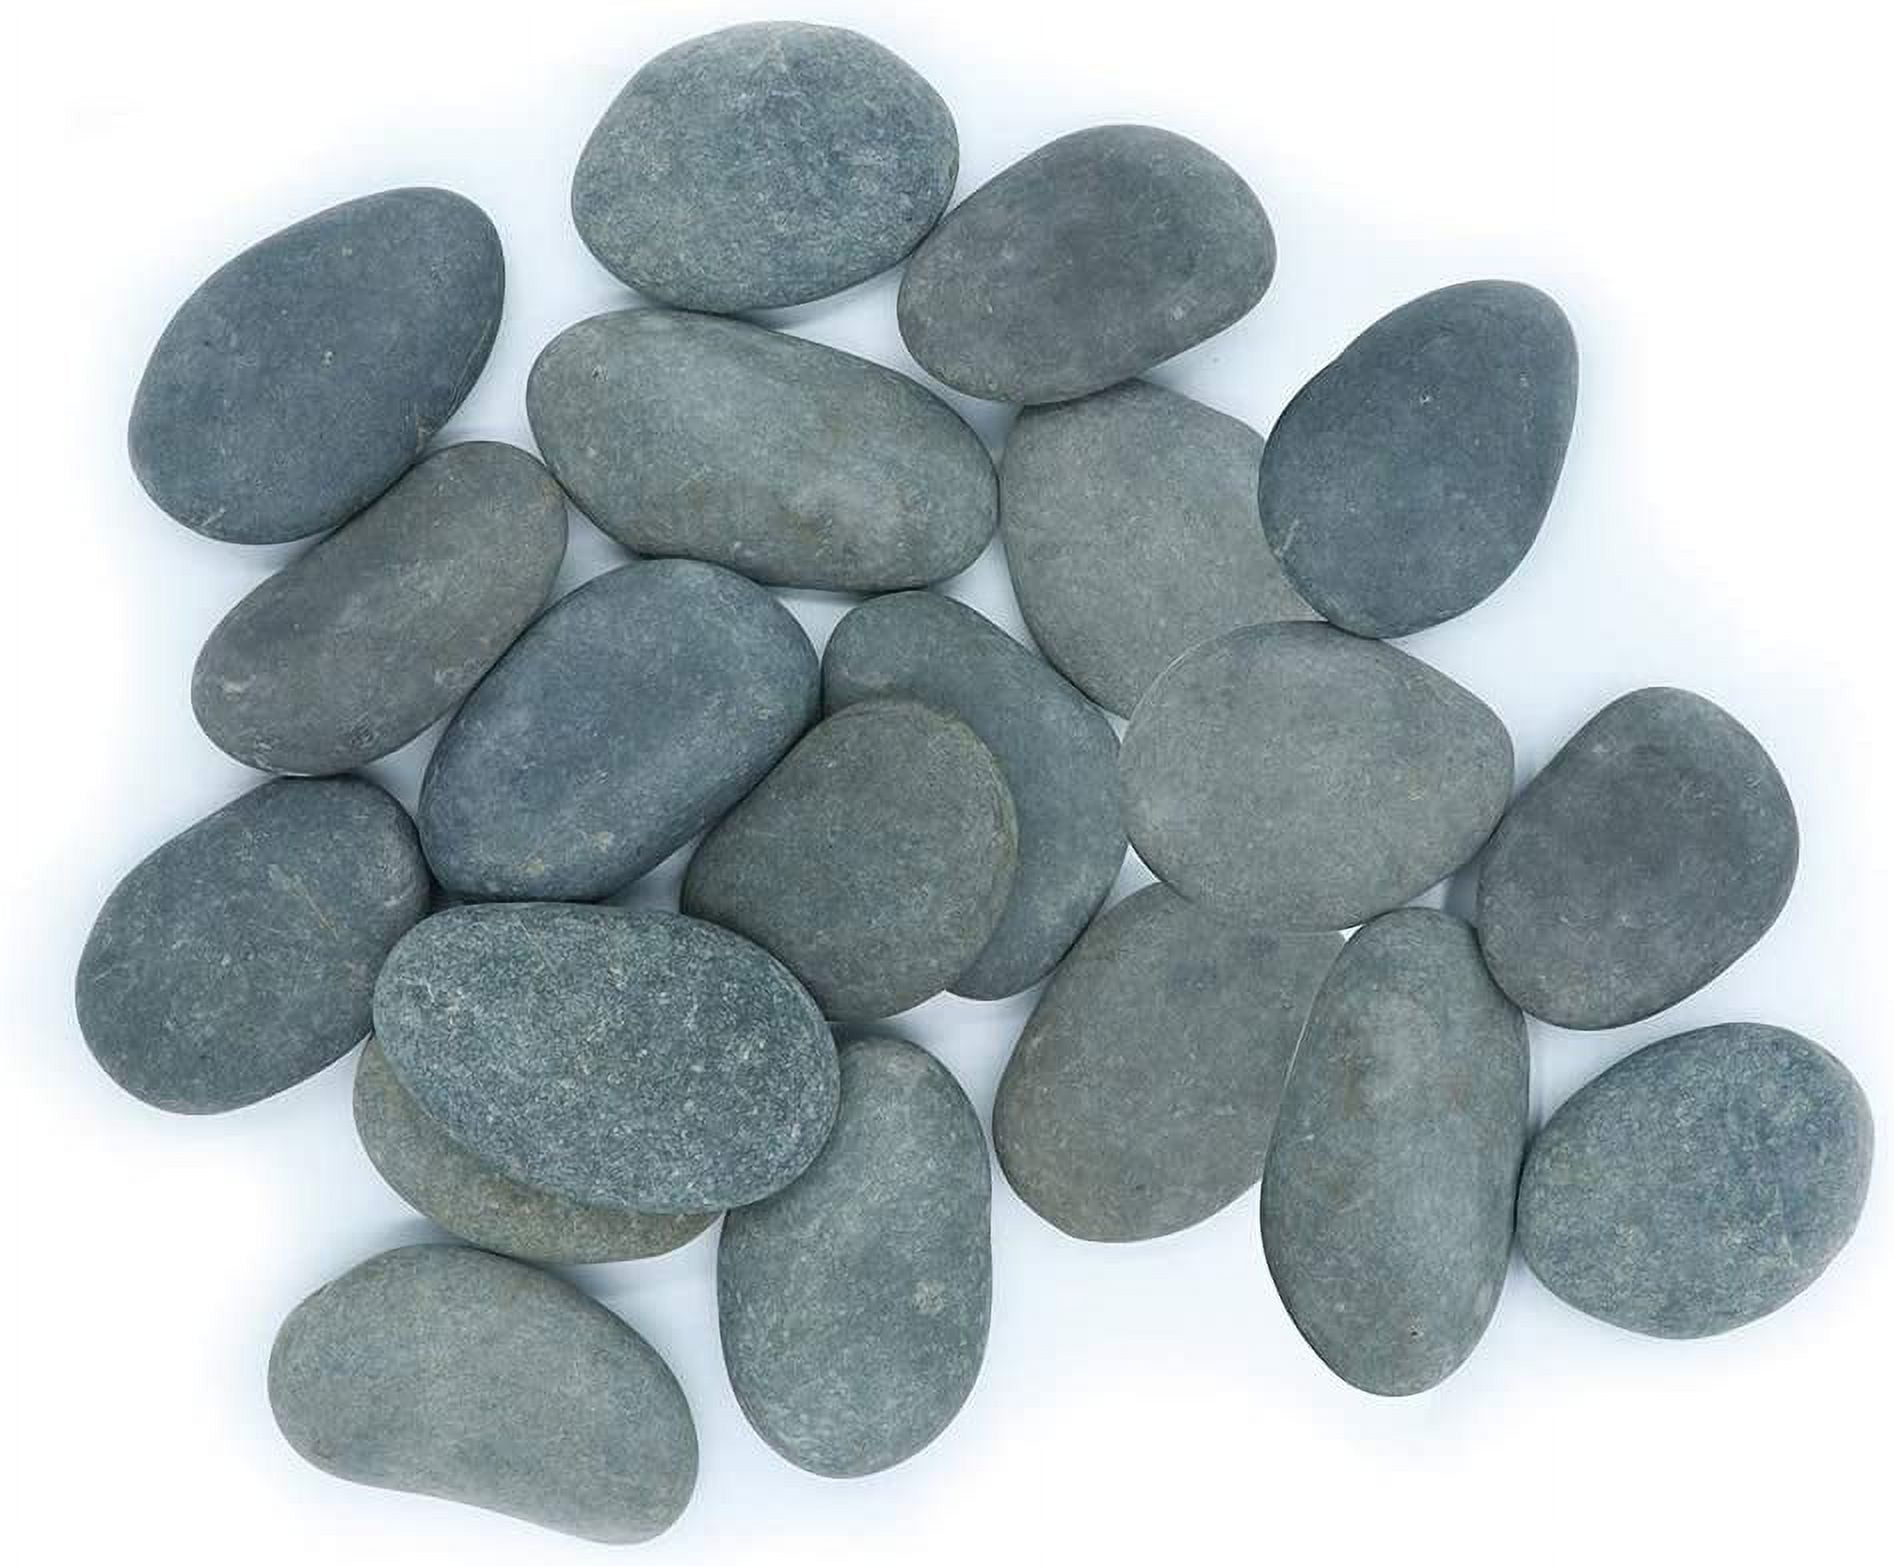 BigOtters River Rocks for Painting, 20pcs Painting Rocks Smooth Unpolished Stones Range from About 2 to 3 Inches Gift for Kid